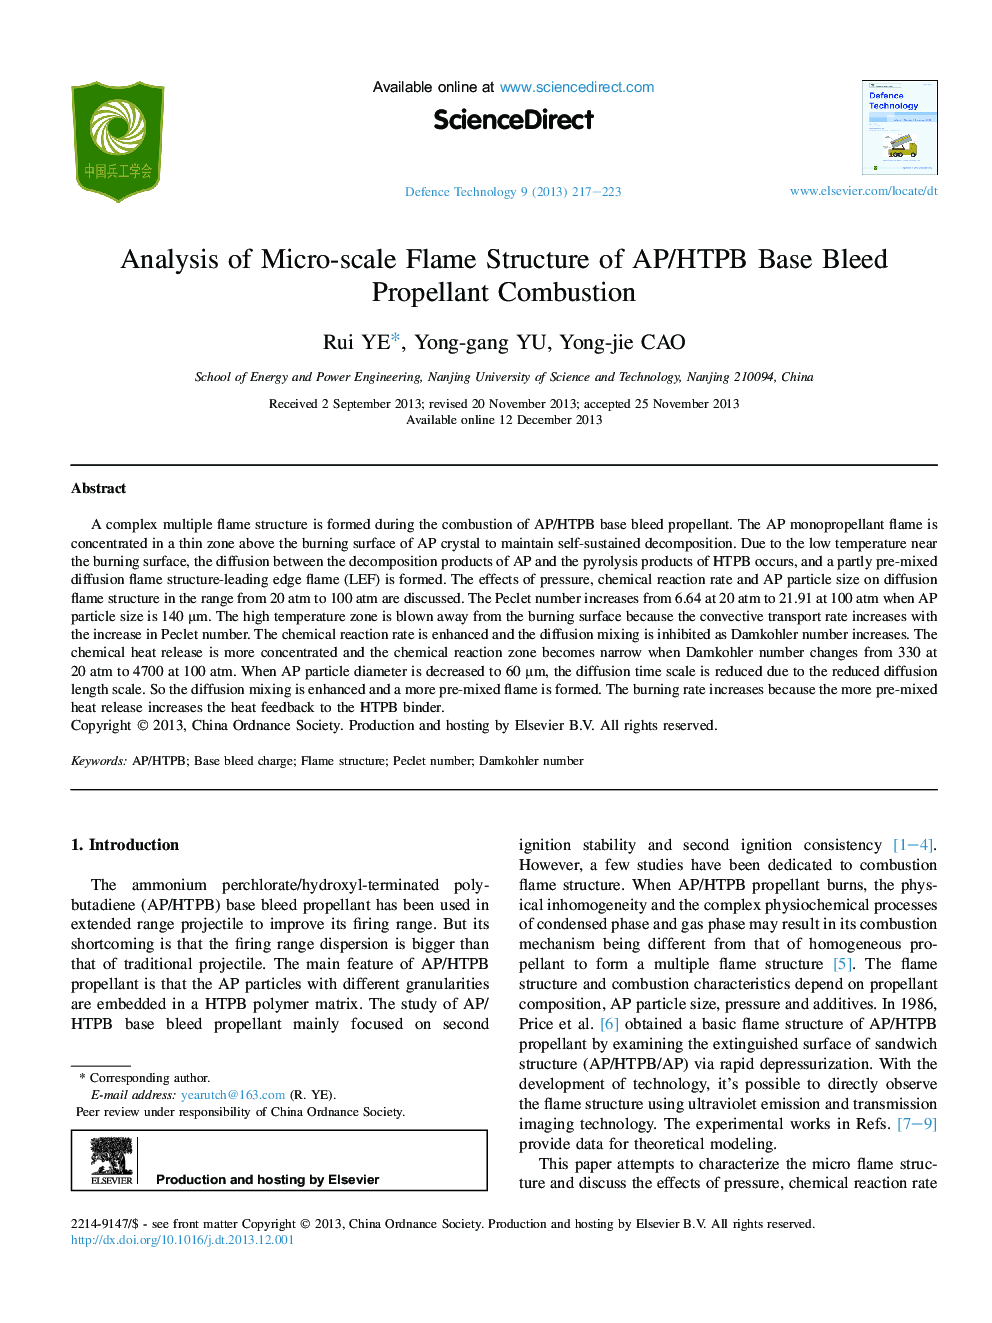 Analysis of Micro-scale Flame Structure of AP/HTPB Base Bleed Propellant Combustion 